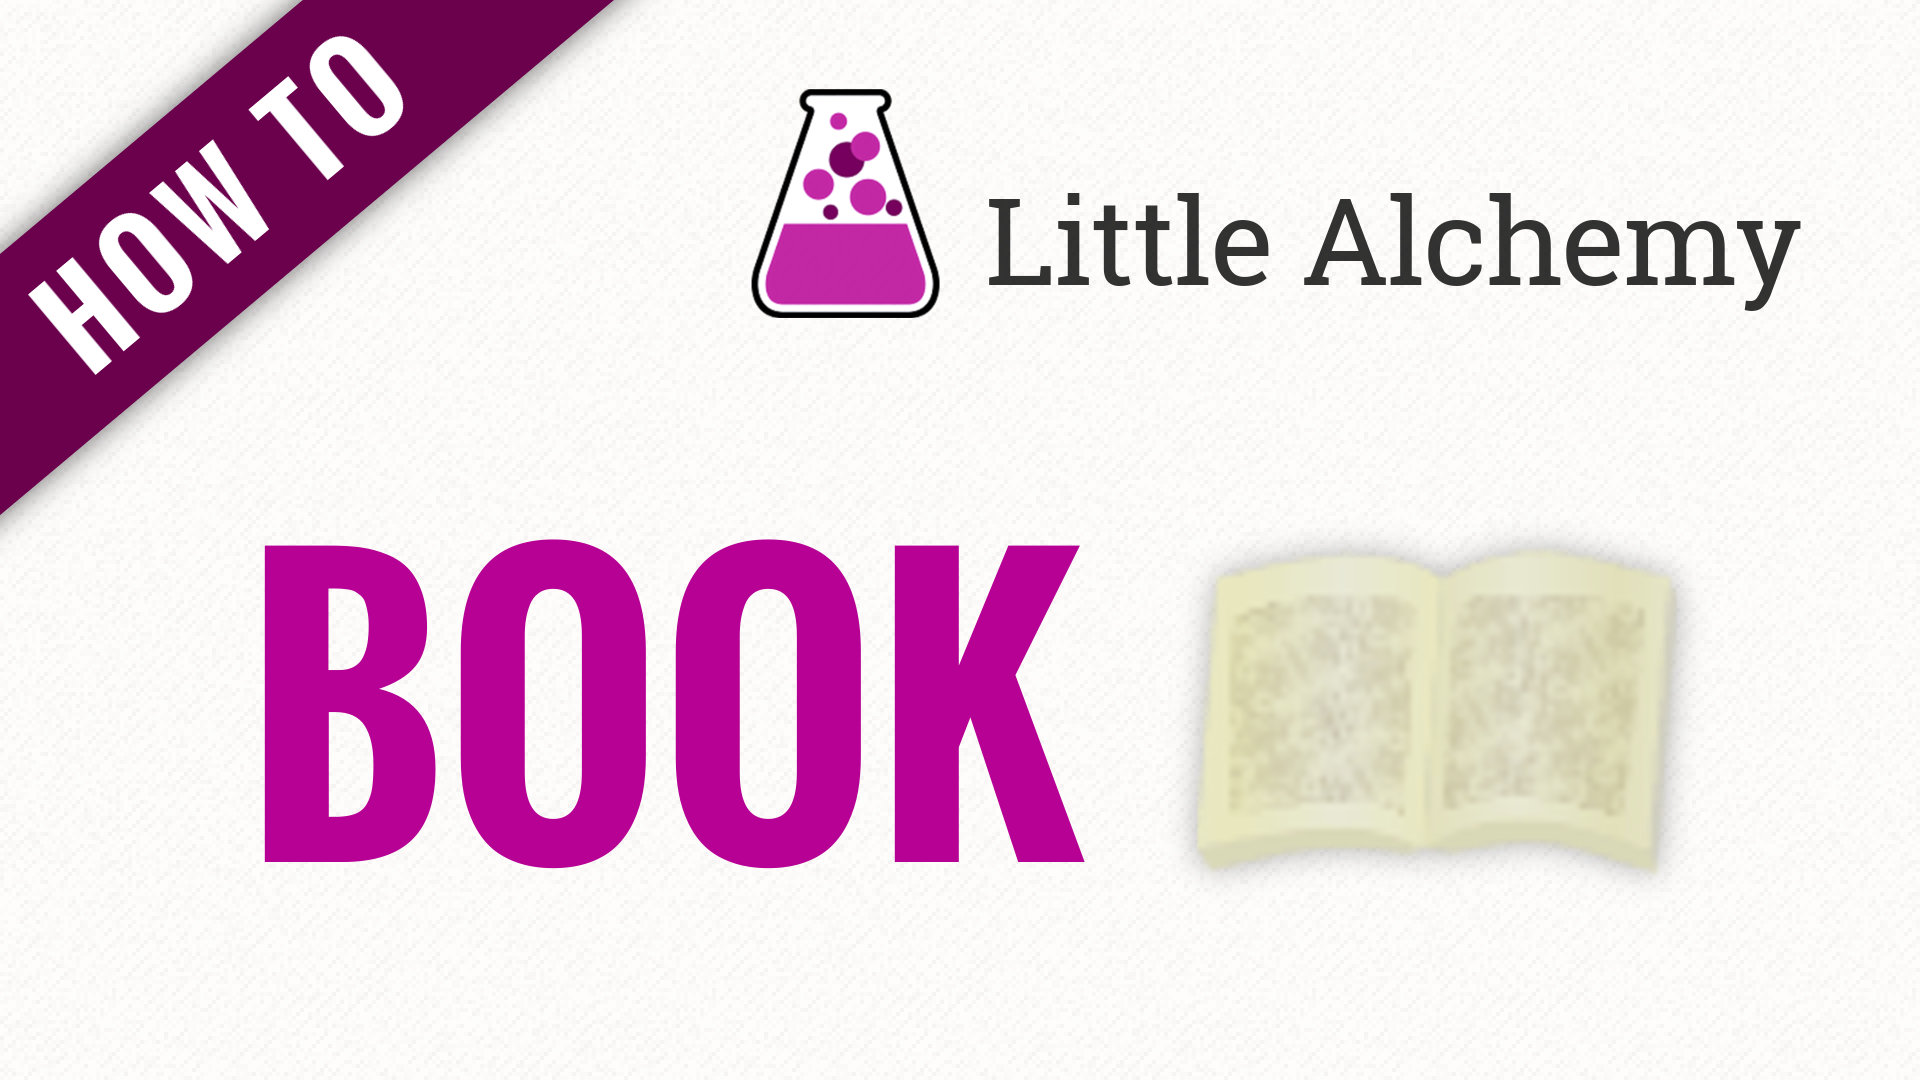 how to make book little alchemy 2